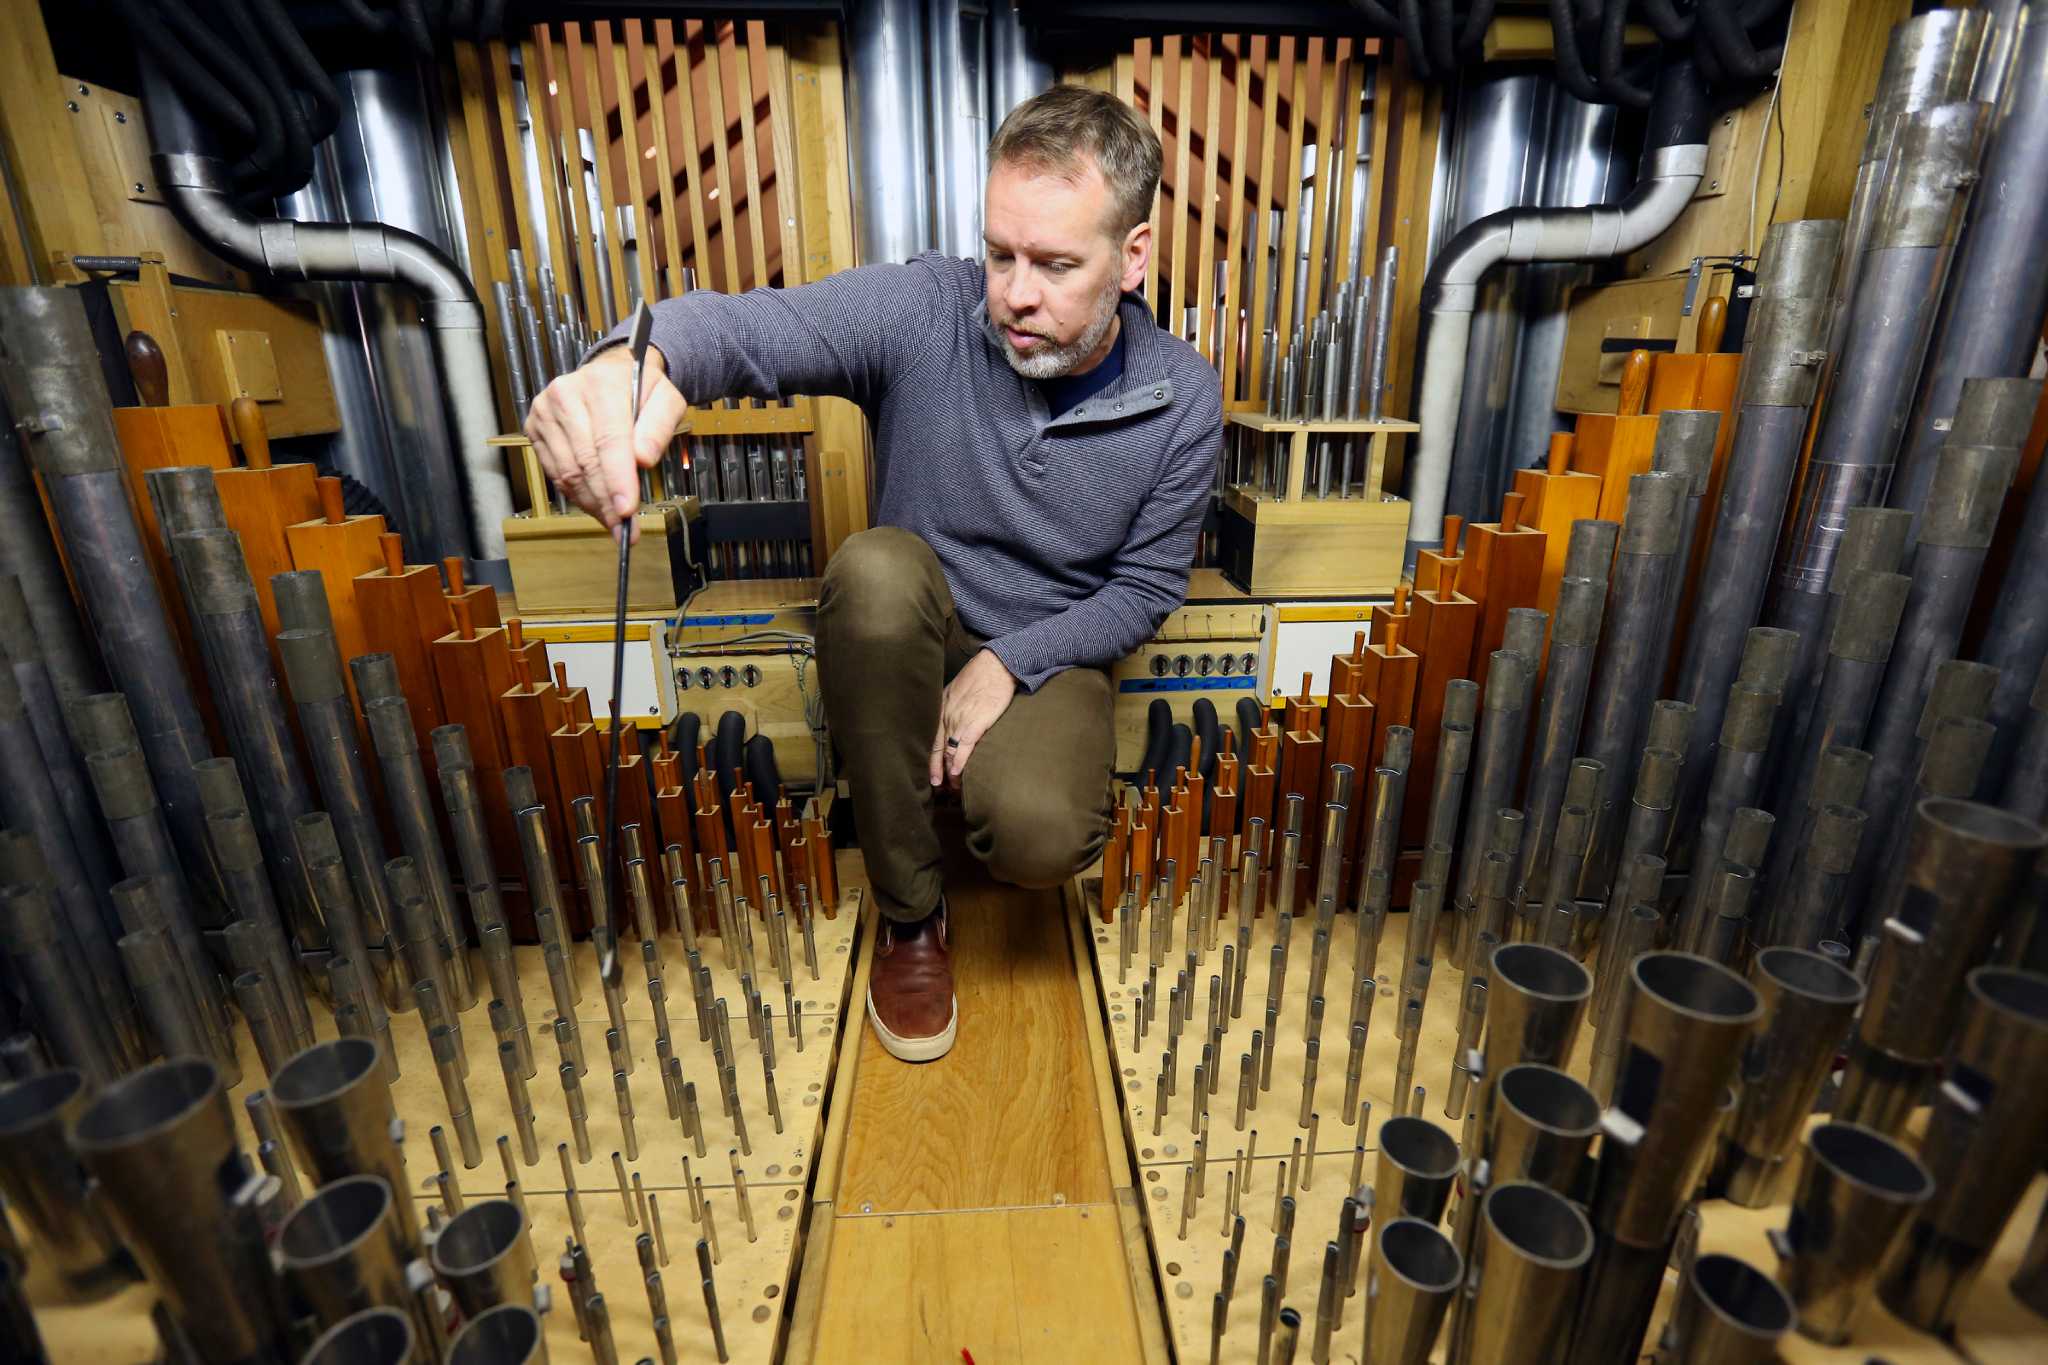 Pipe organ builder keeps S.A.’s grand instruments in tune